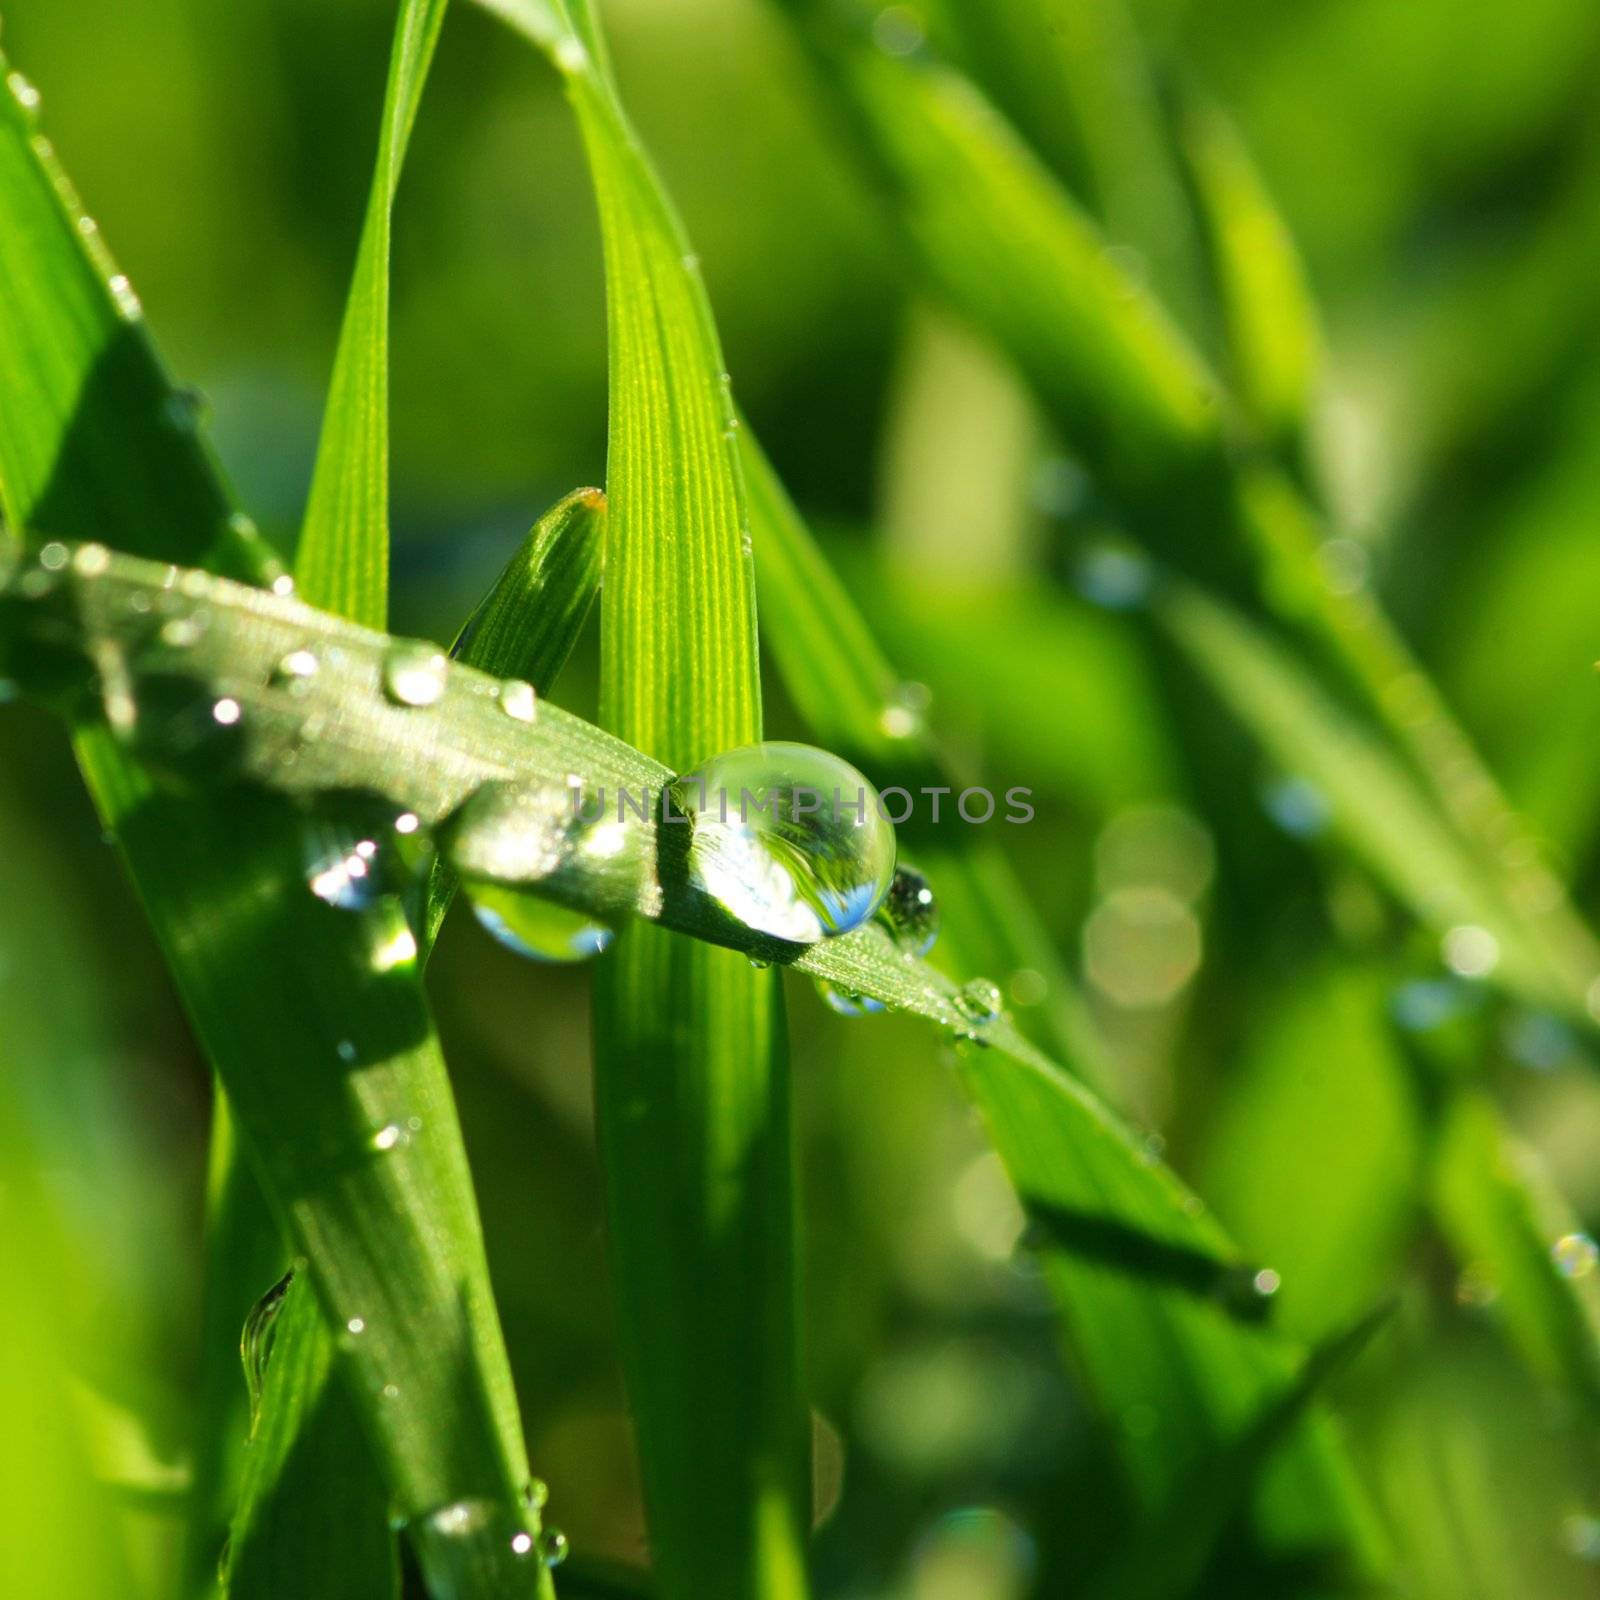 Dew drop on a blade of grass 